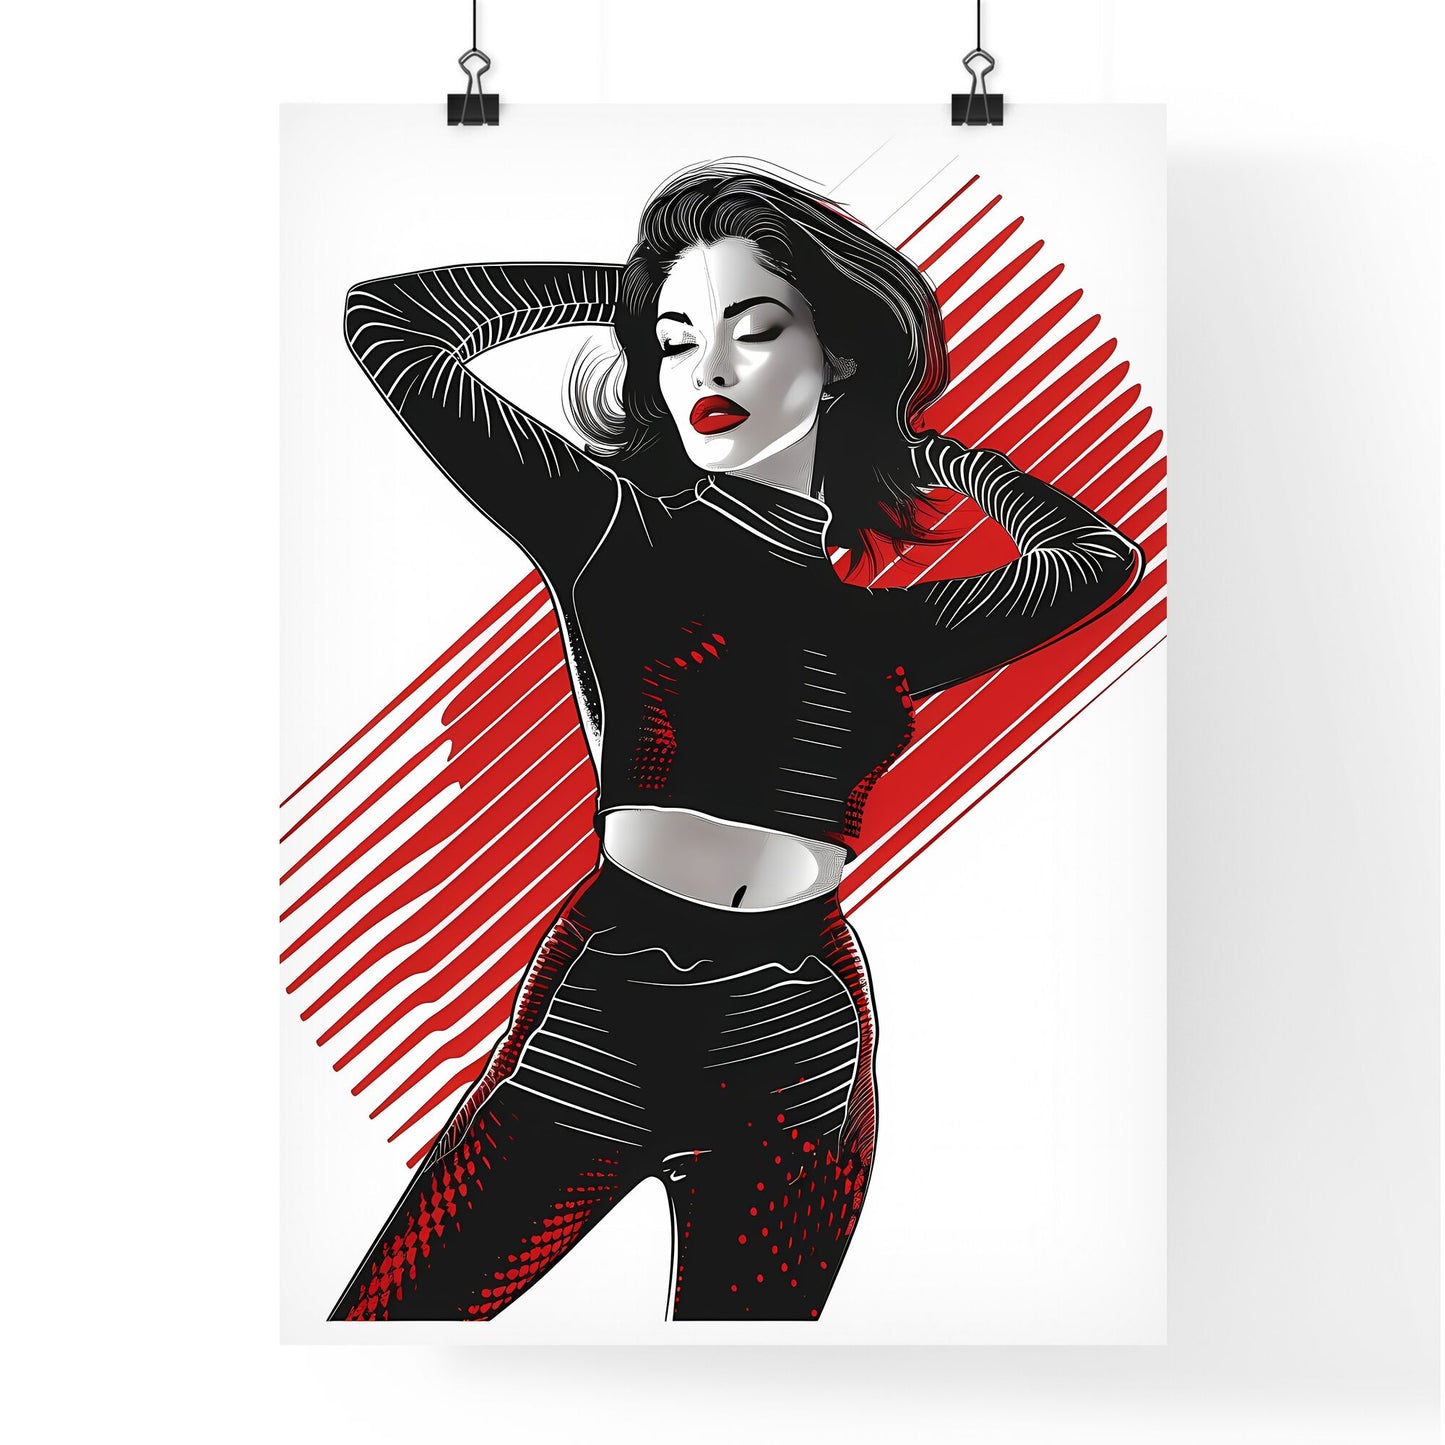 Fashion Illustration: Hyper-Detailed Woman in Striking Pose with Moire Effect Elements in Vibrant Black, White, and Red Default Title